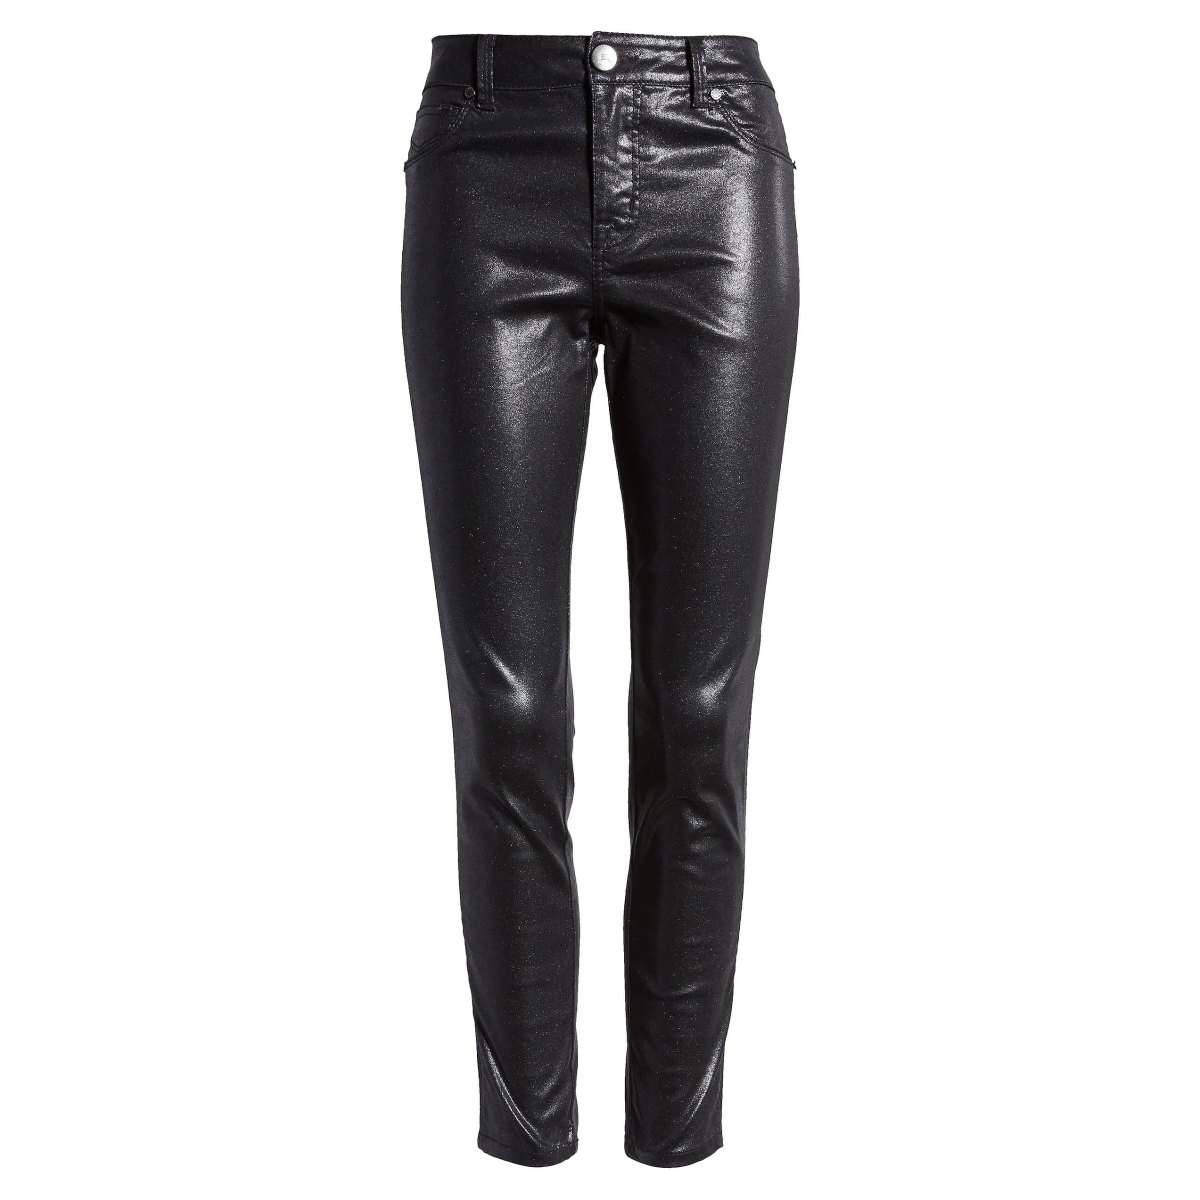 1822 Denim Shimmer Skinny Jeans Are a Night-Out Staple